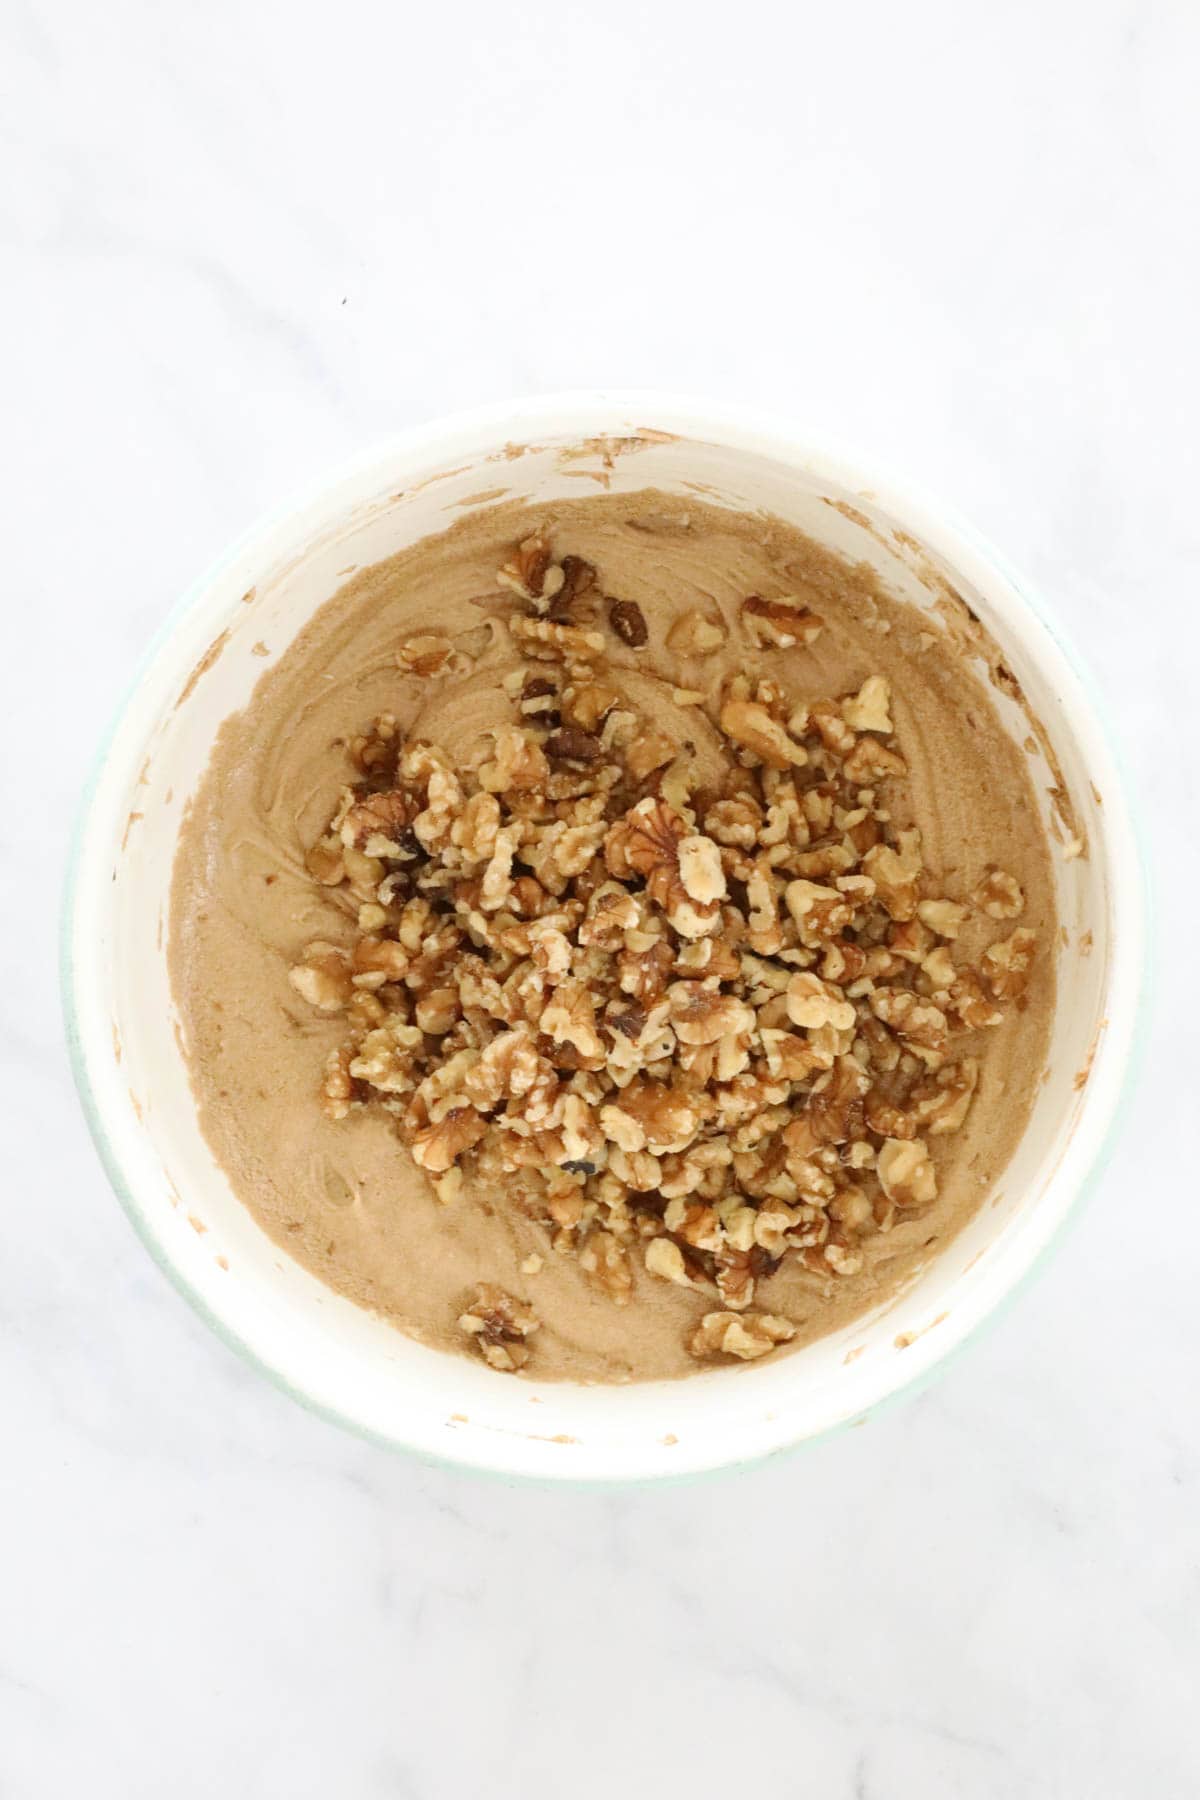 Chopped walnuts added to the loaf mixture in a white mixing bowl.